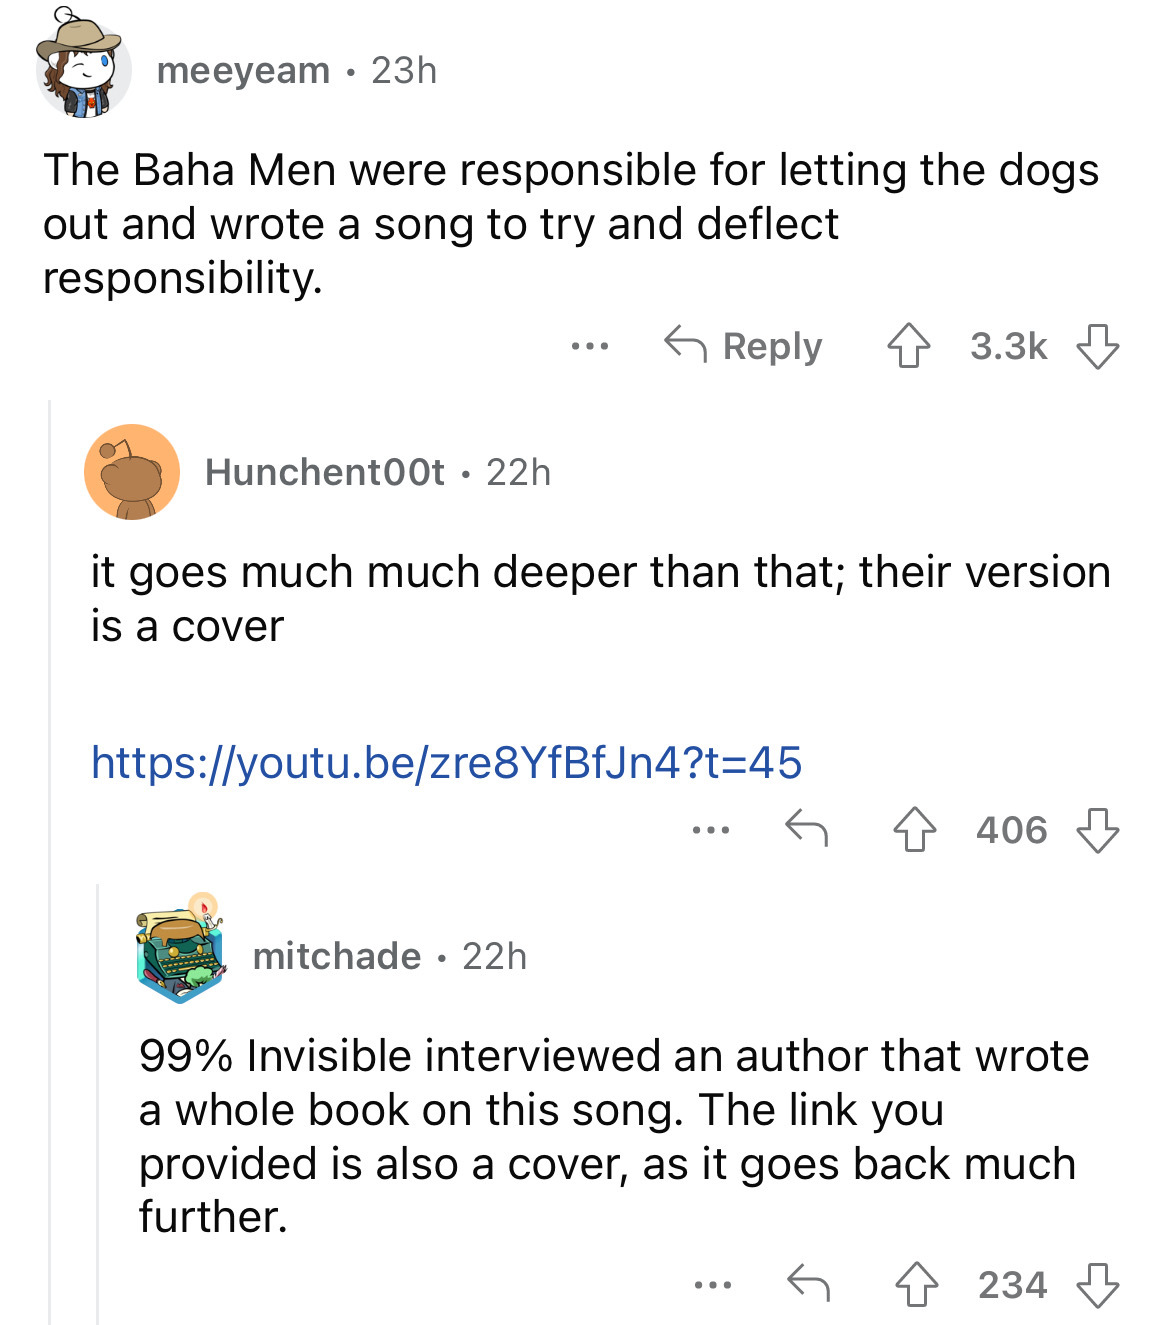 angle - meeyeam 23h The Baha Men were responsible for letting the dogs out and wrote a song to try and deflect responsibility. Hunchent00t. 22h ... mitchade 22h it goes much much deeper than that; their version is a cover ... ... 406 99% Invisible intervi